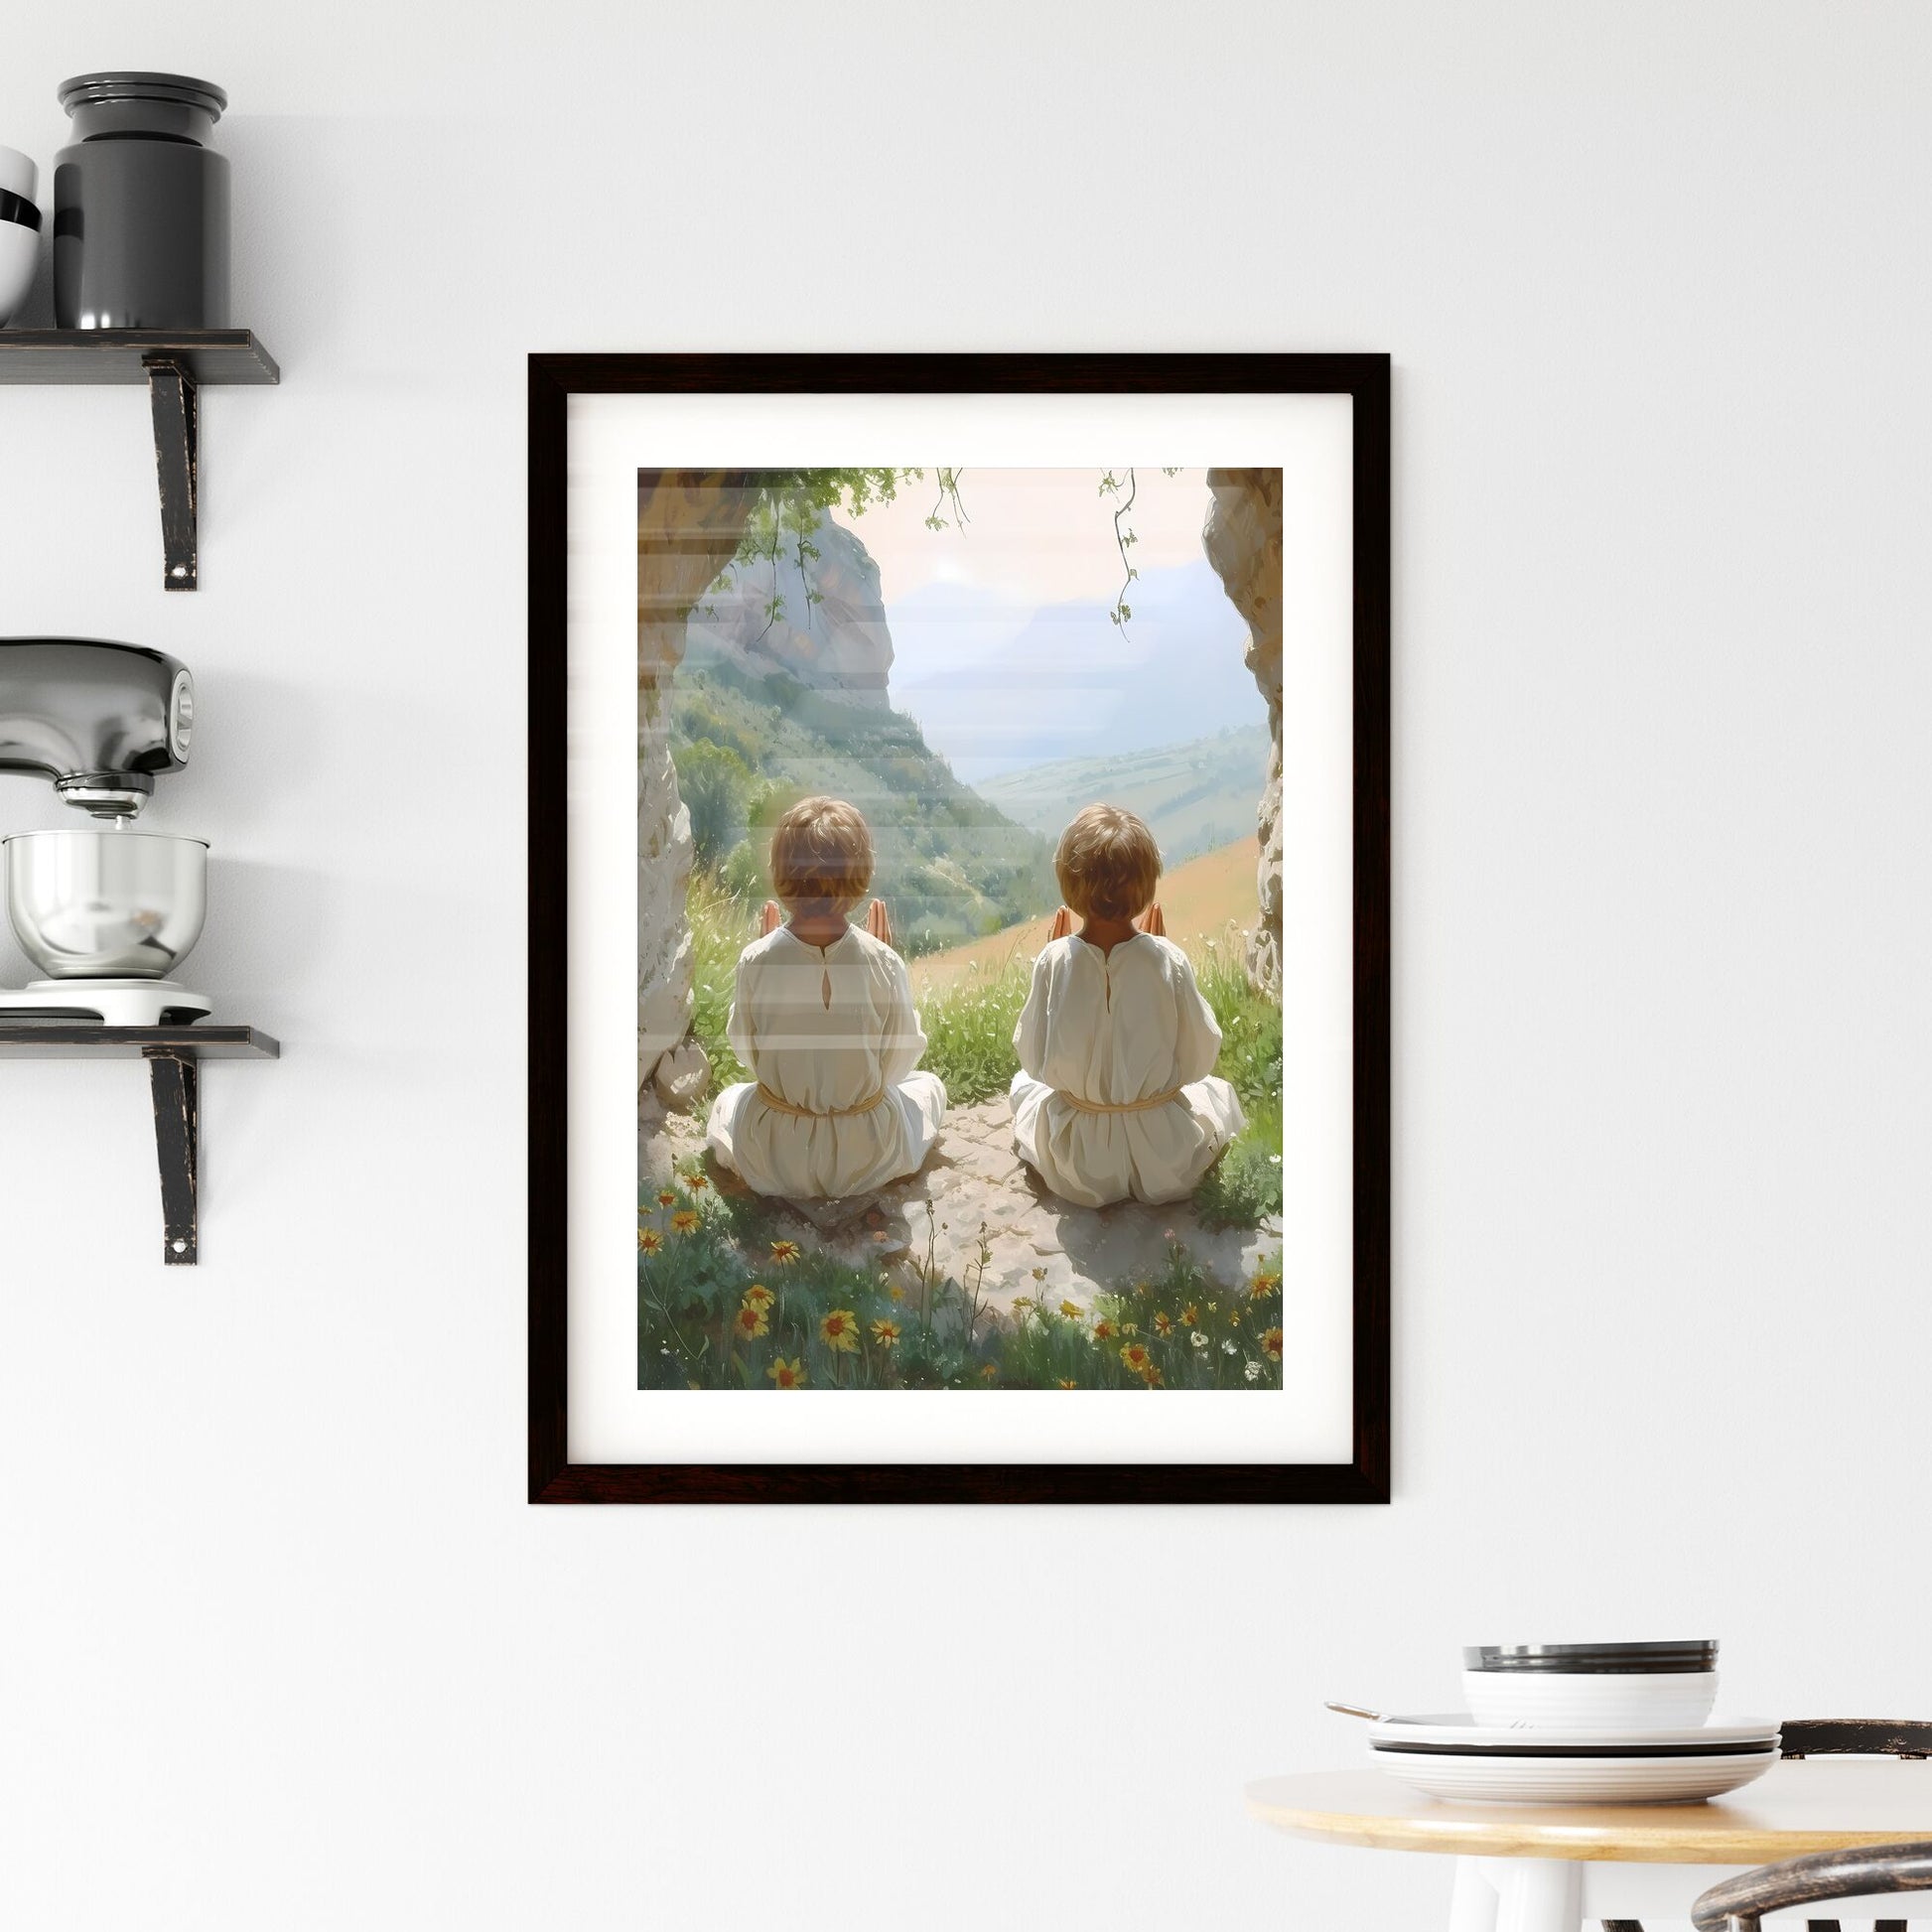 Two young man, Cain and Abel, praying to God in a sacred place - Art print of two children sitting in a cave looking at a valley Default Title